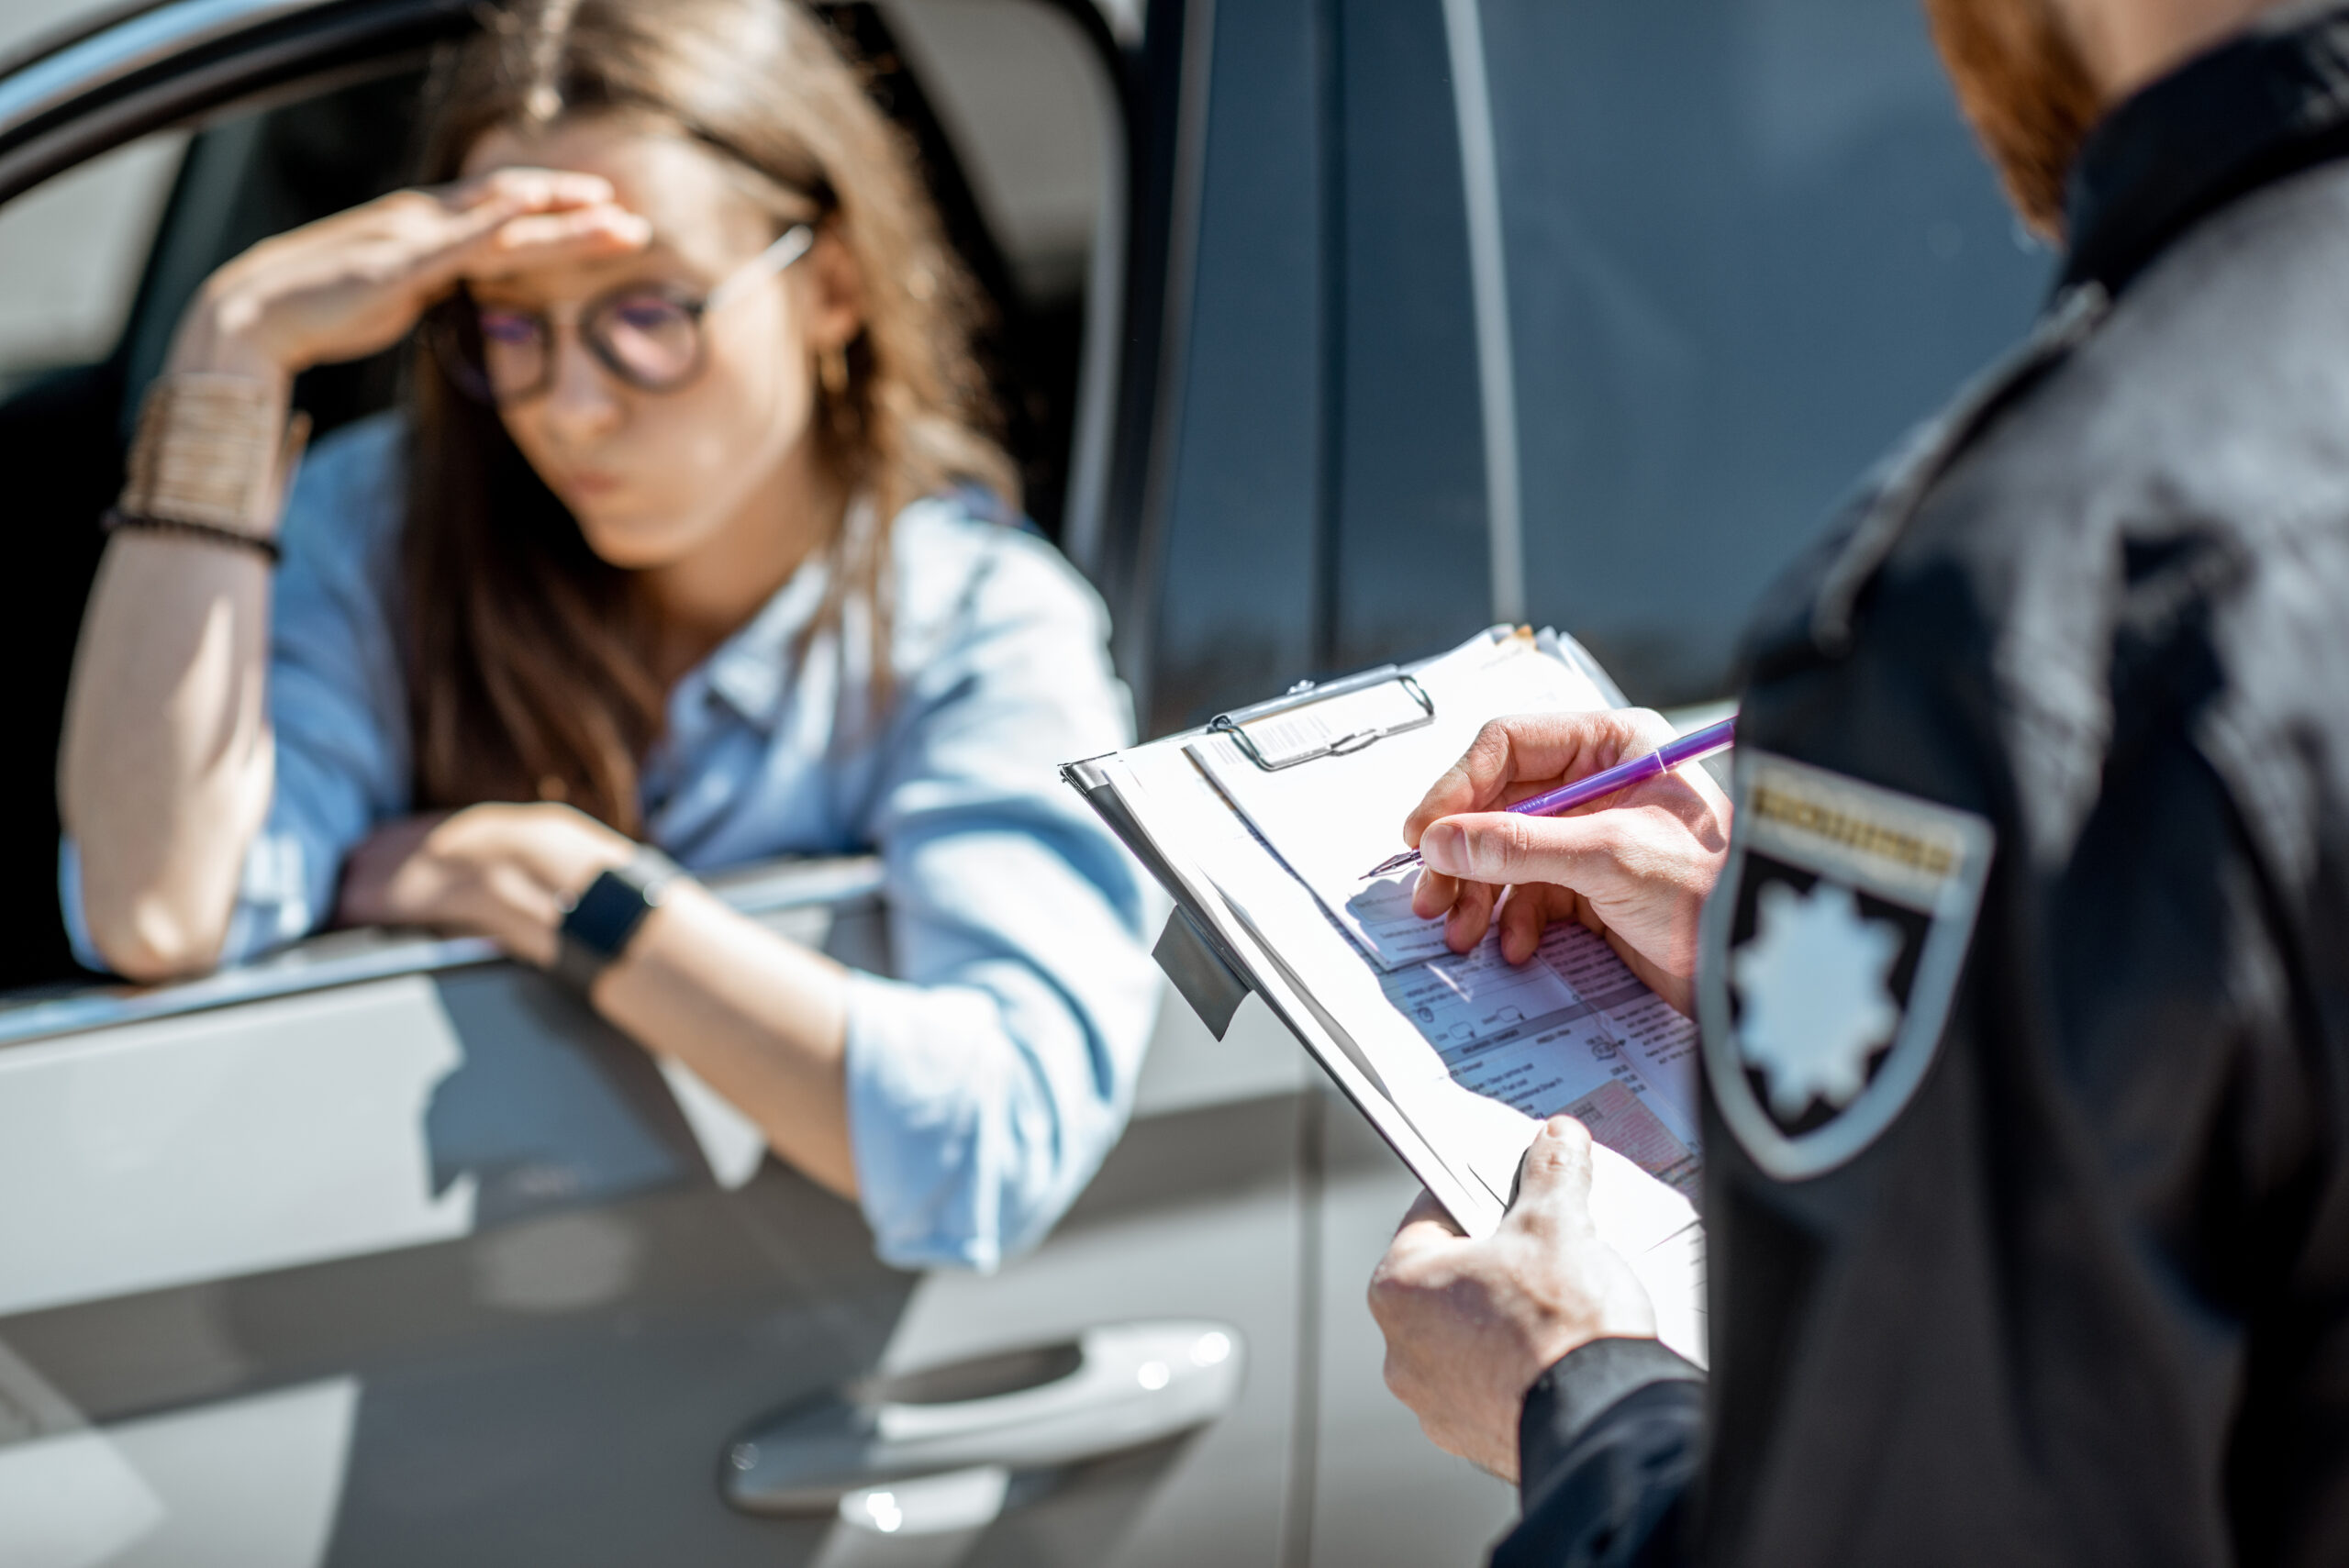 What Steps Should You Take if Accused of a Misdemeanor Traffic Violation?